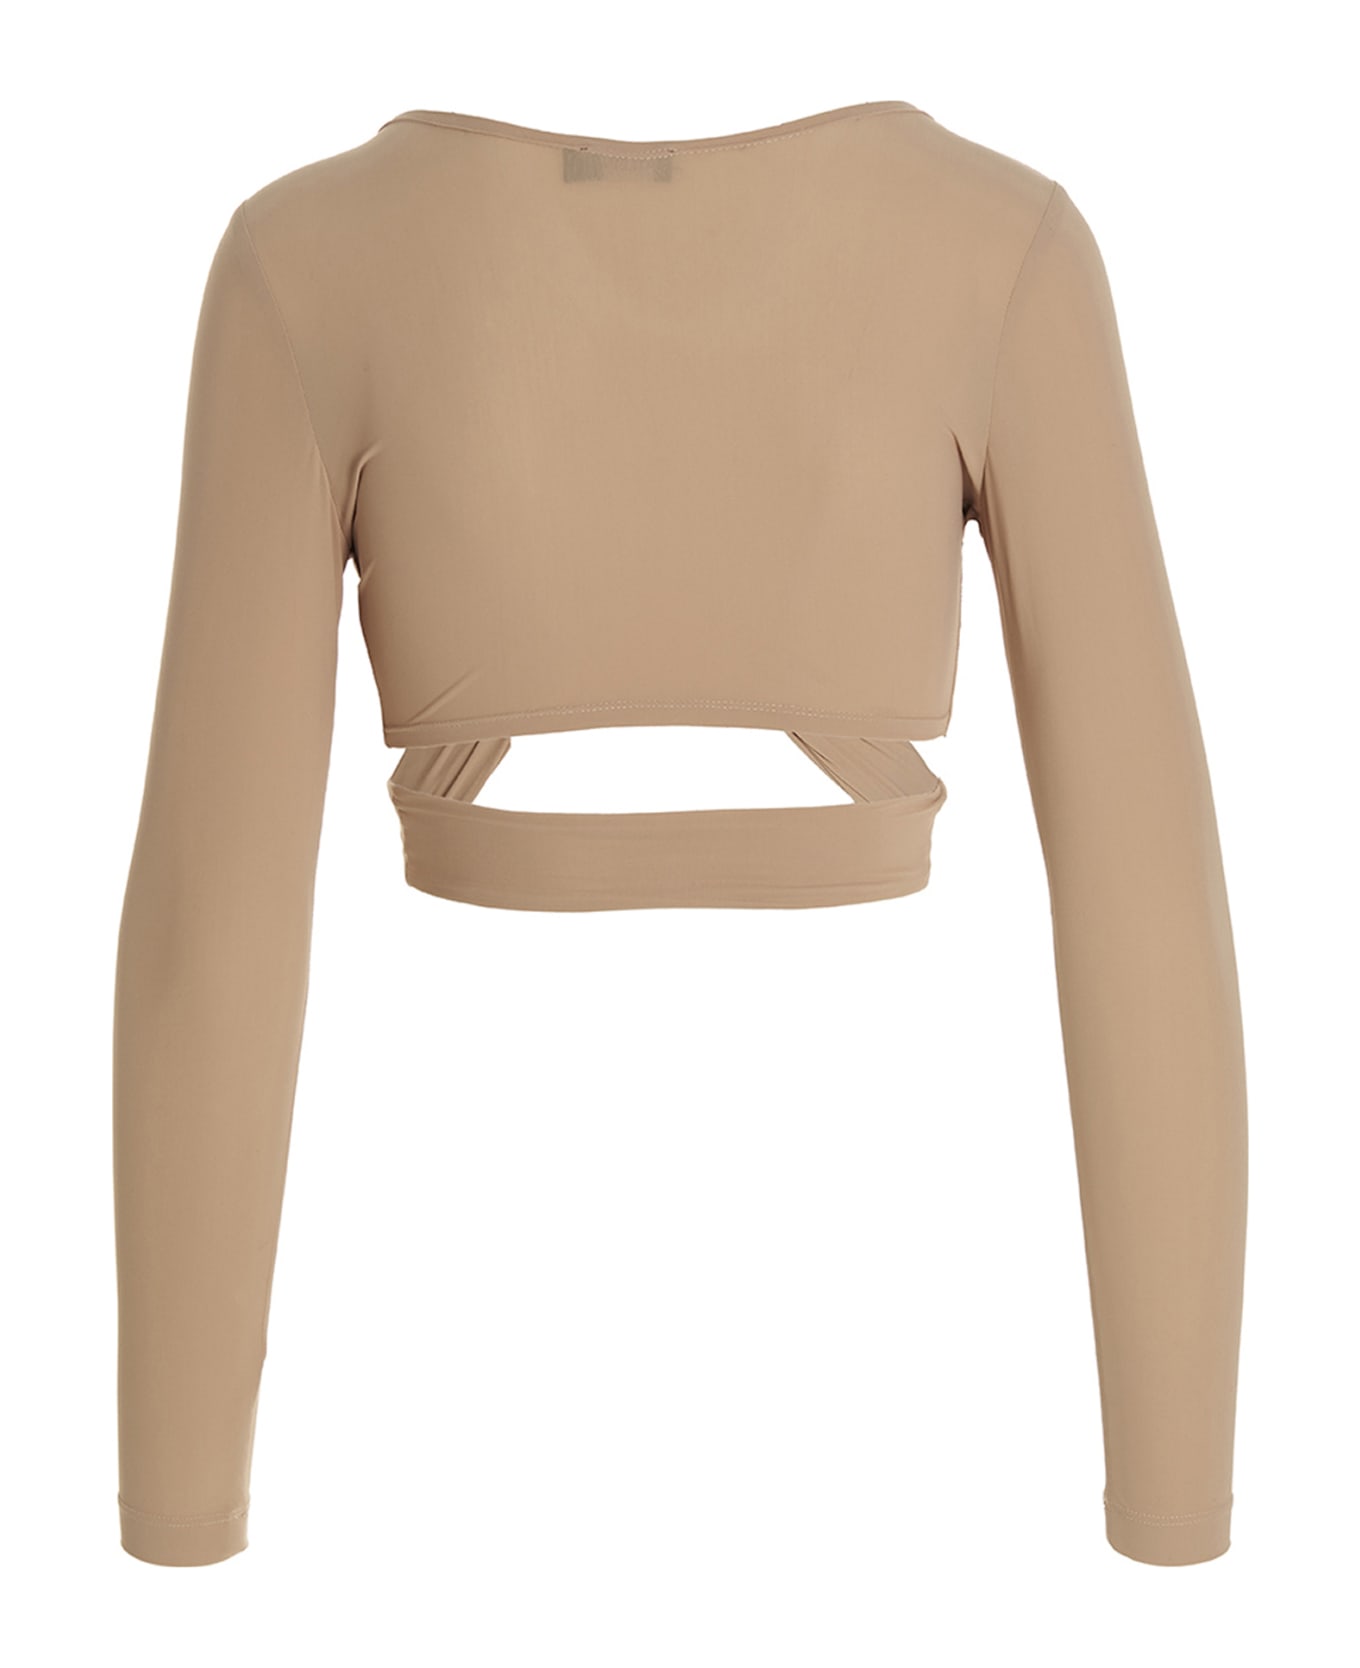 Atlein Crossed Cropped Top - Beige トップス